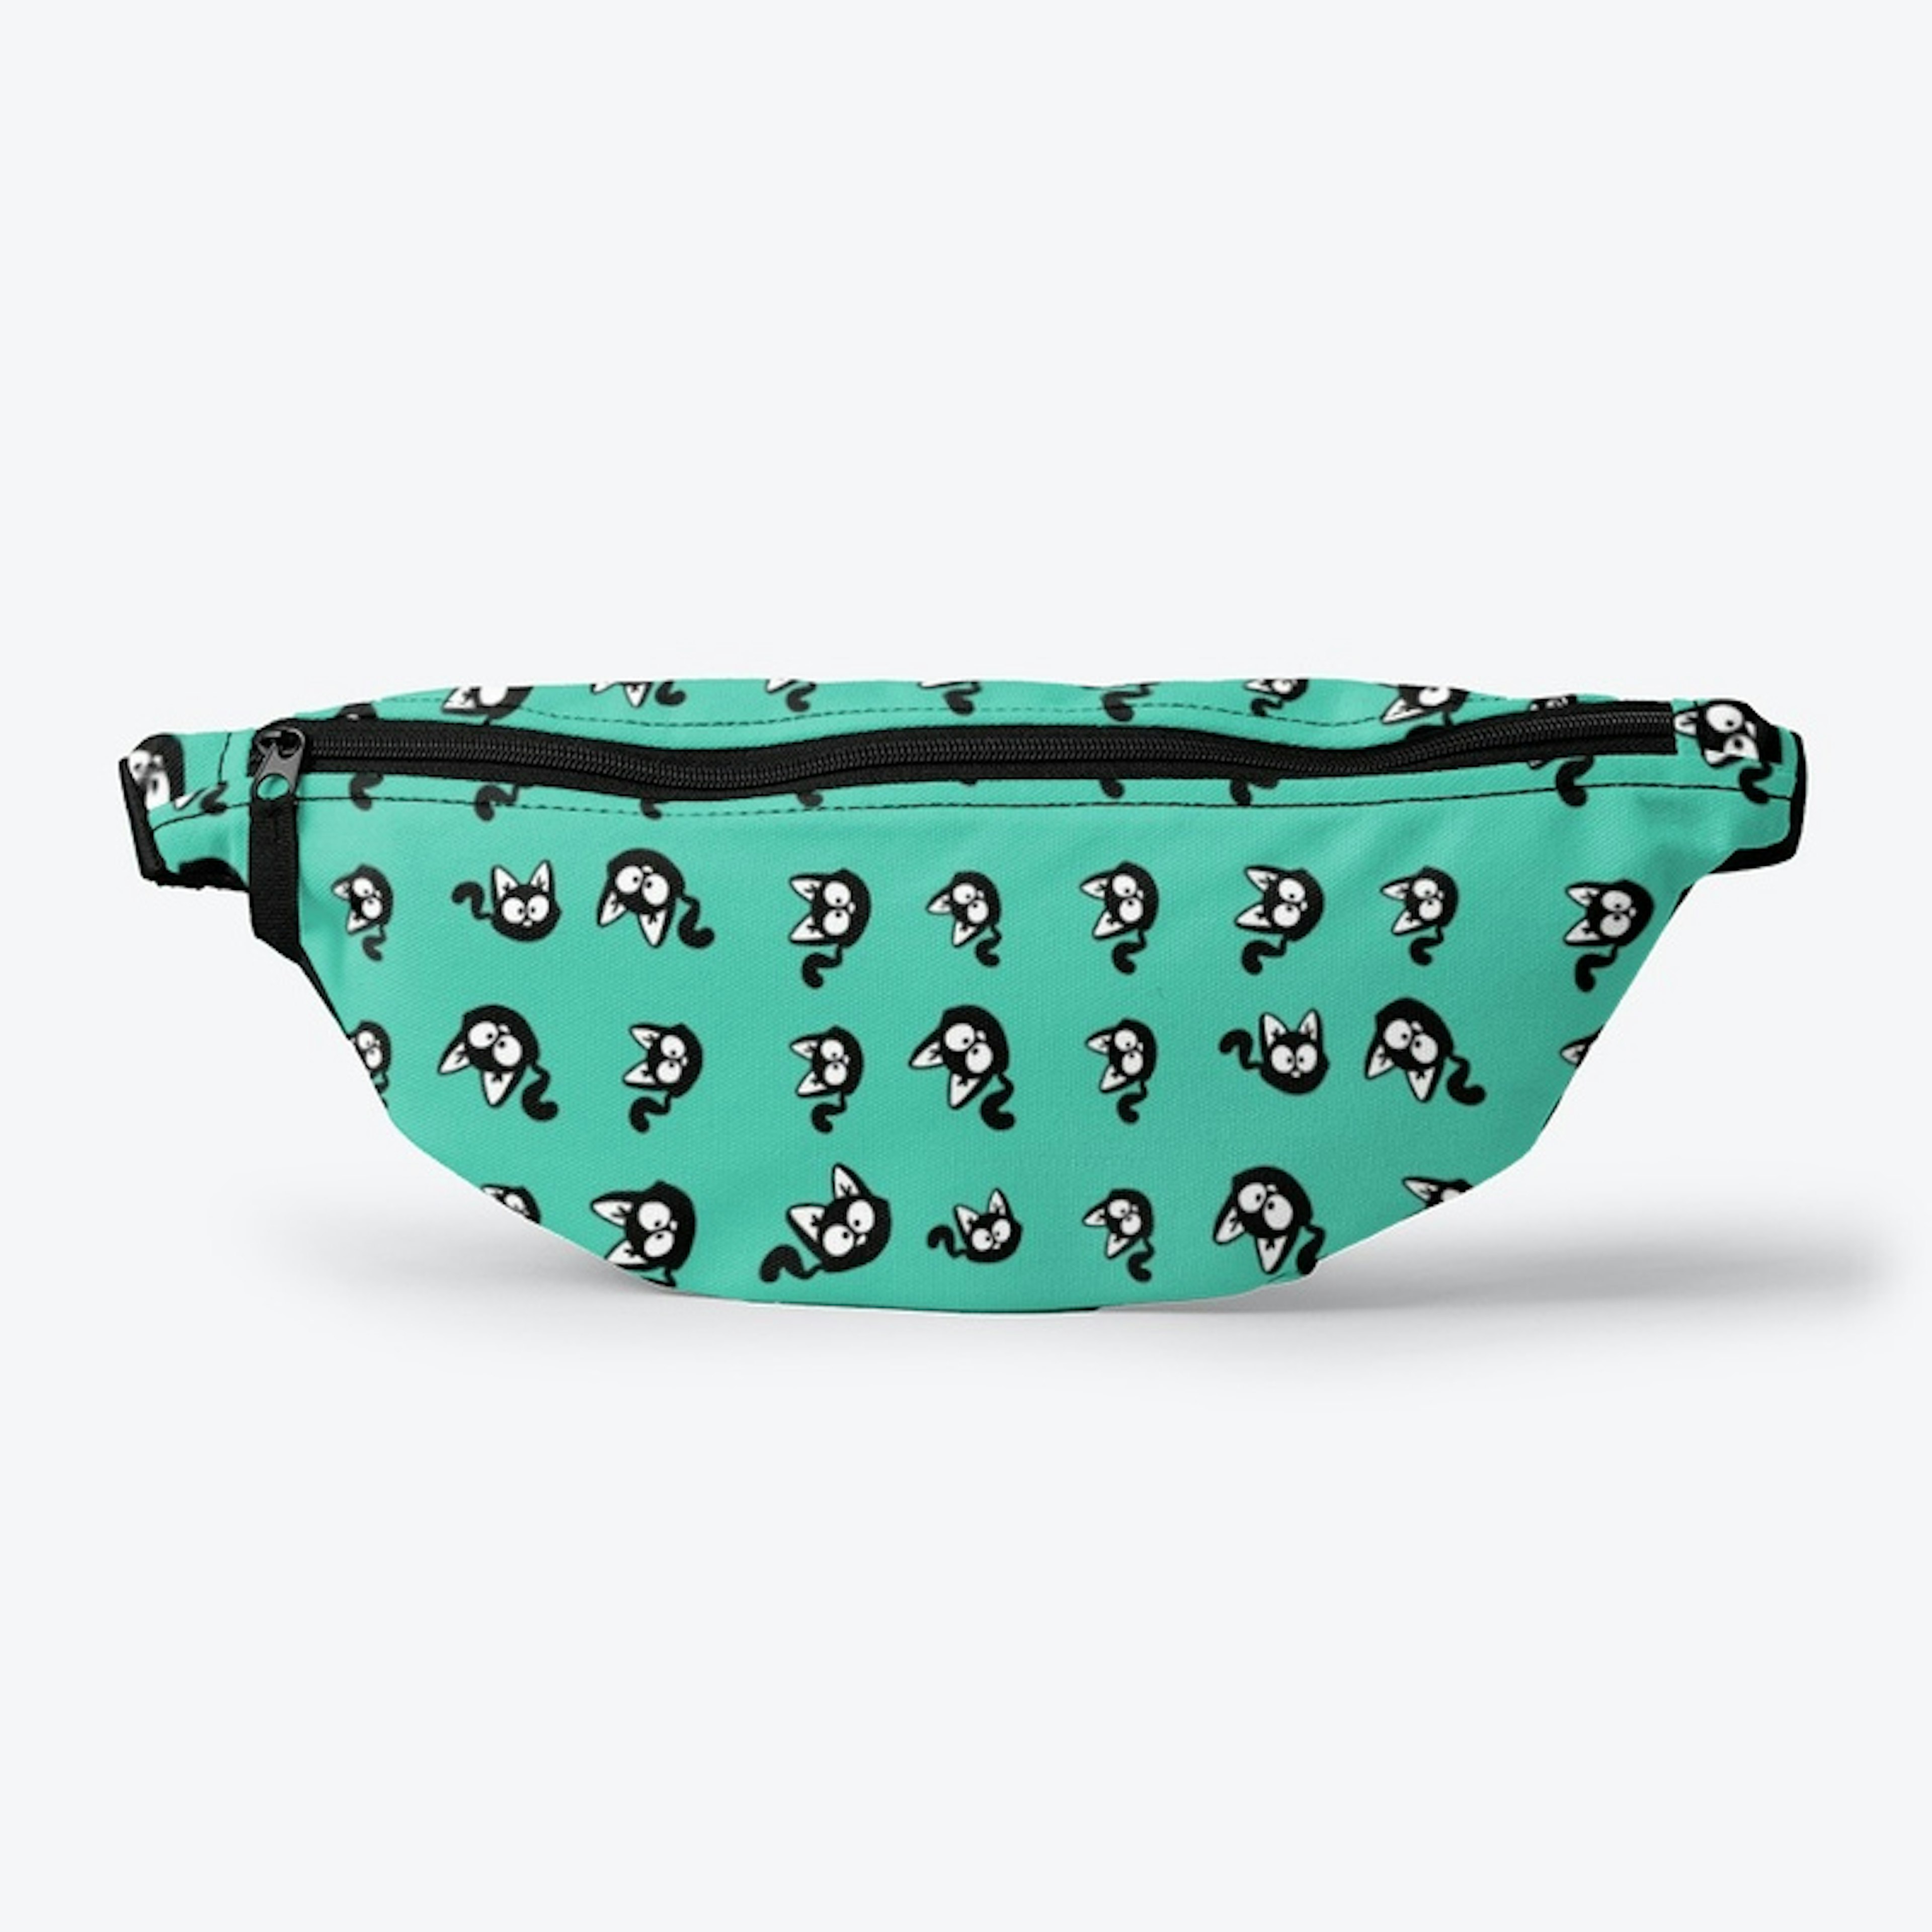 Cute Fannypack with cats!